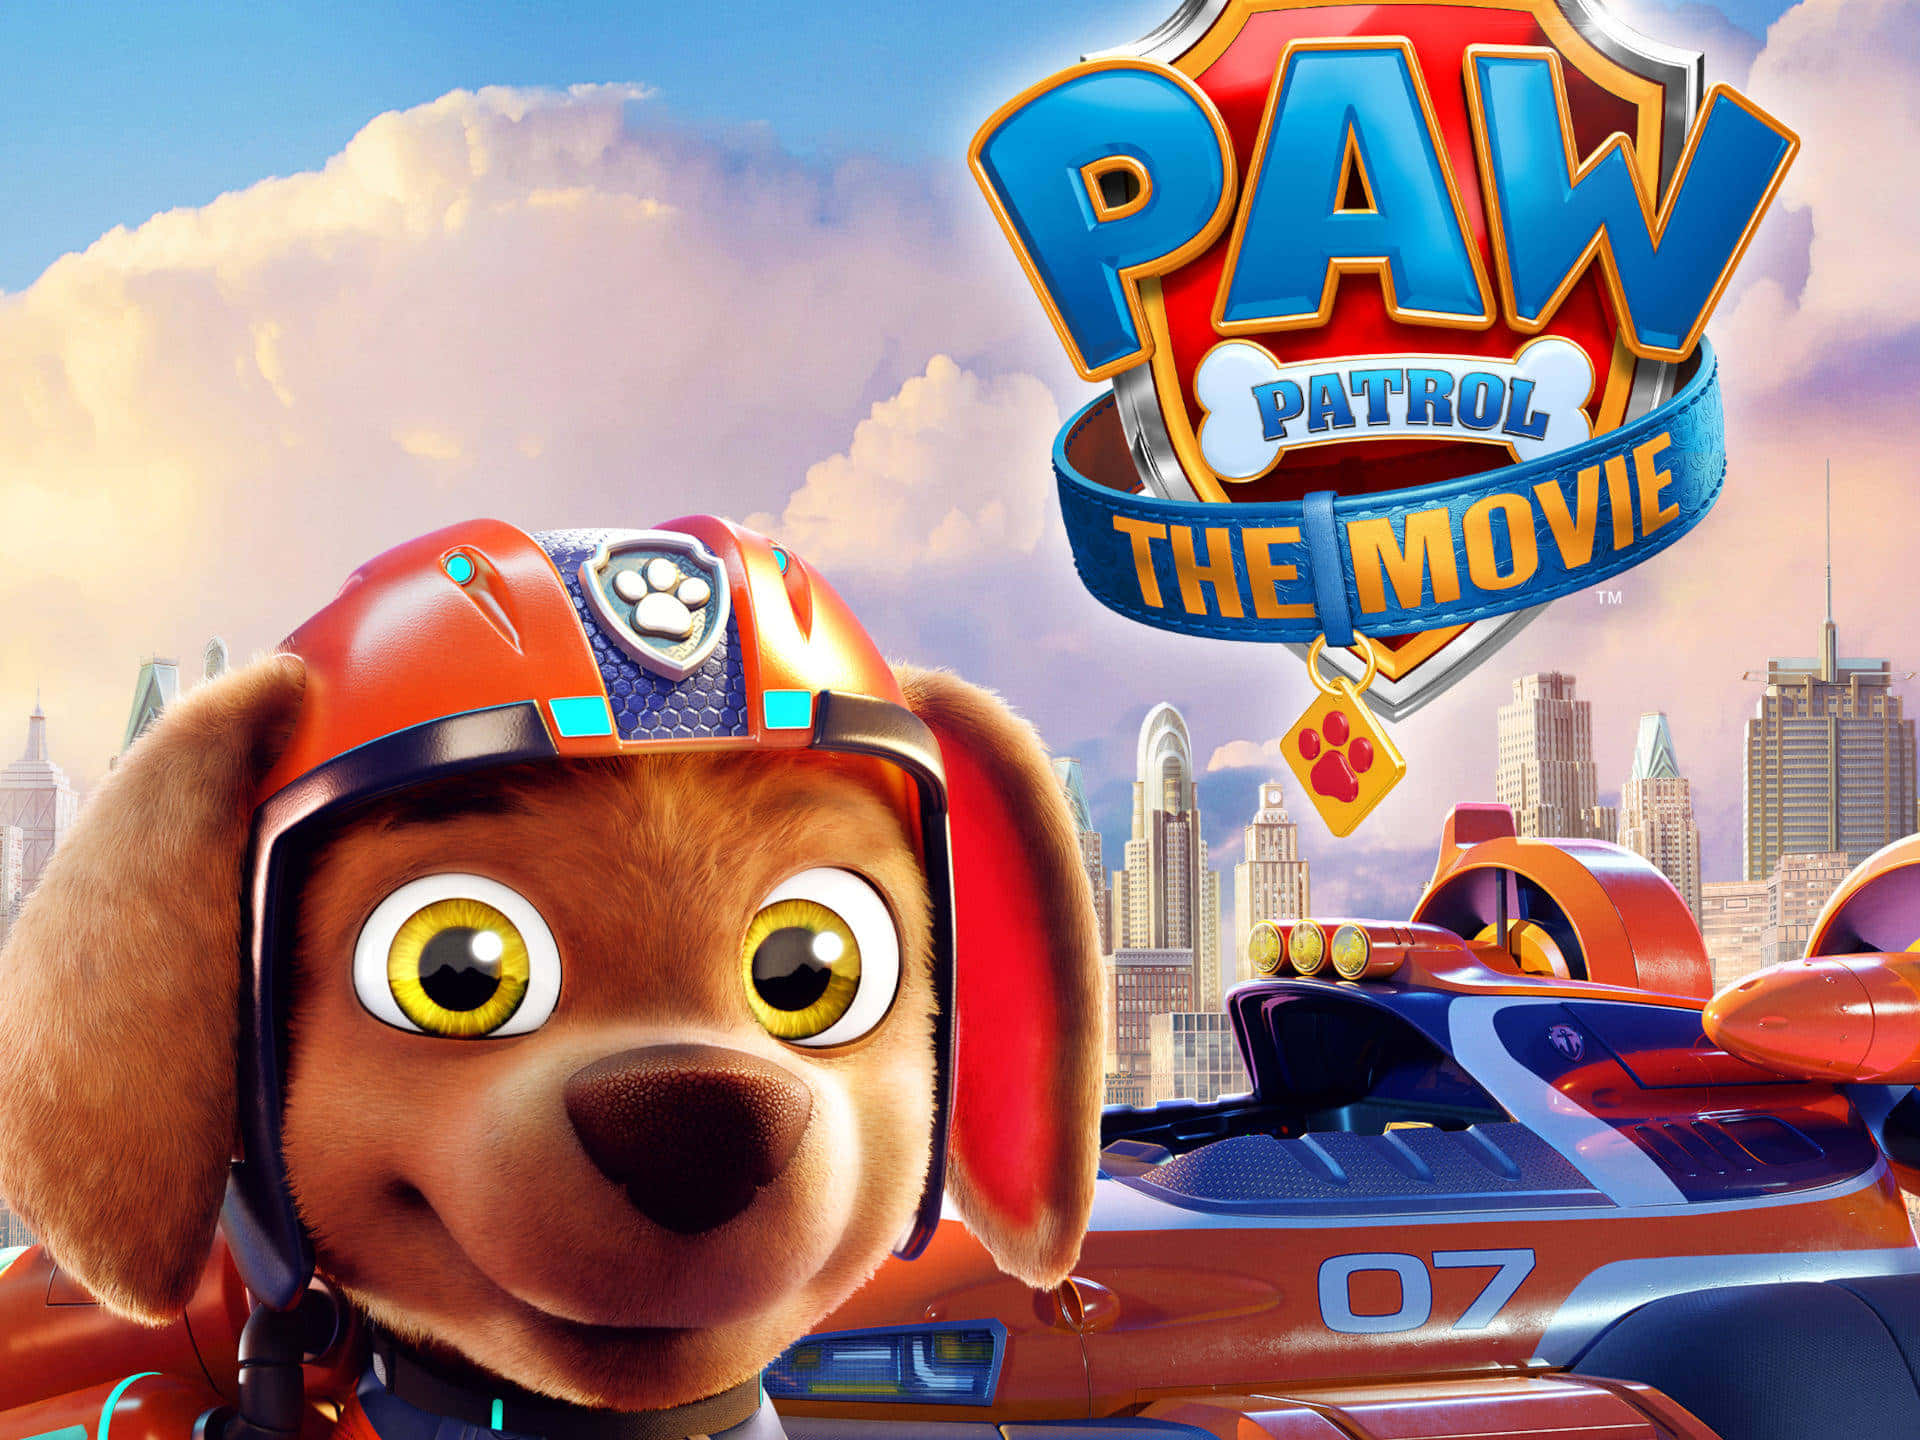 Skye Paw Patrol The Movie Promotional Cover Wallpaper